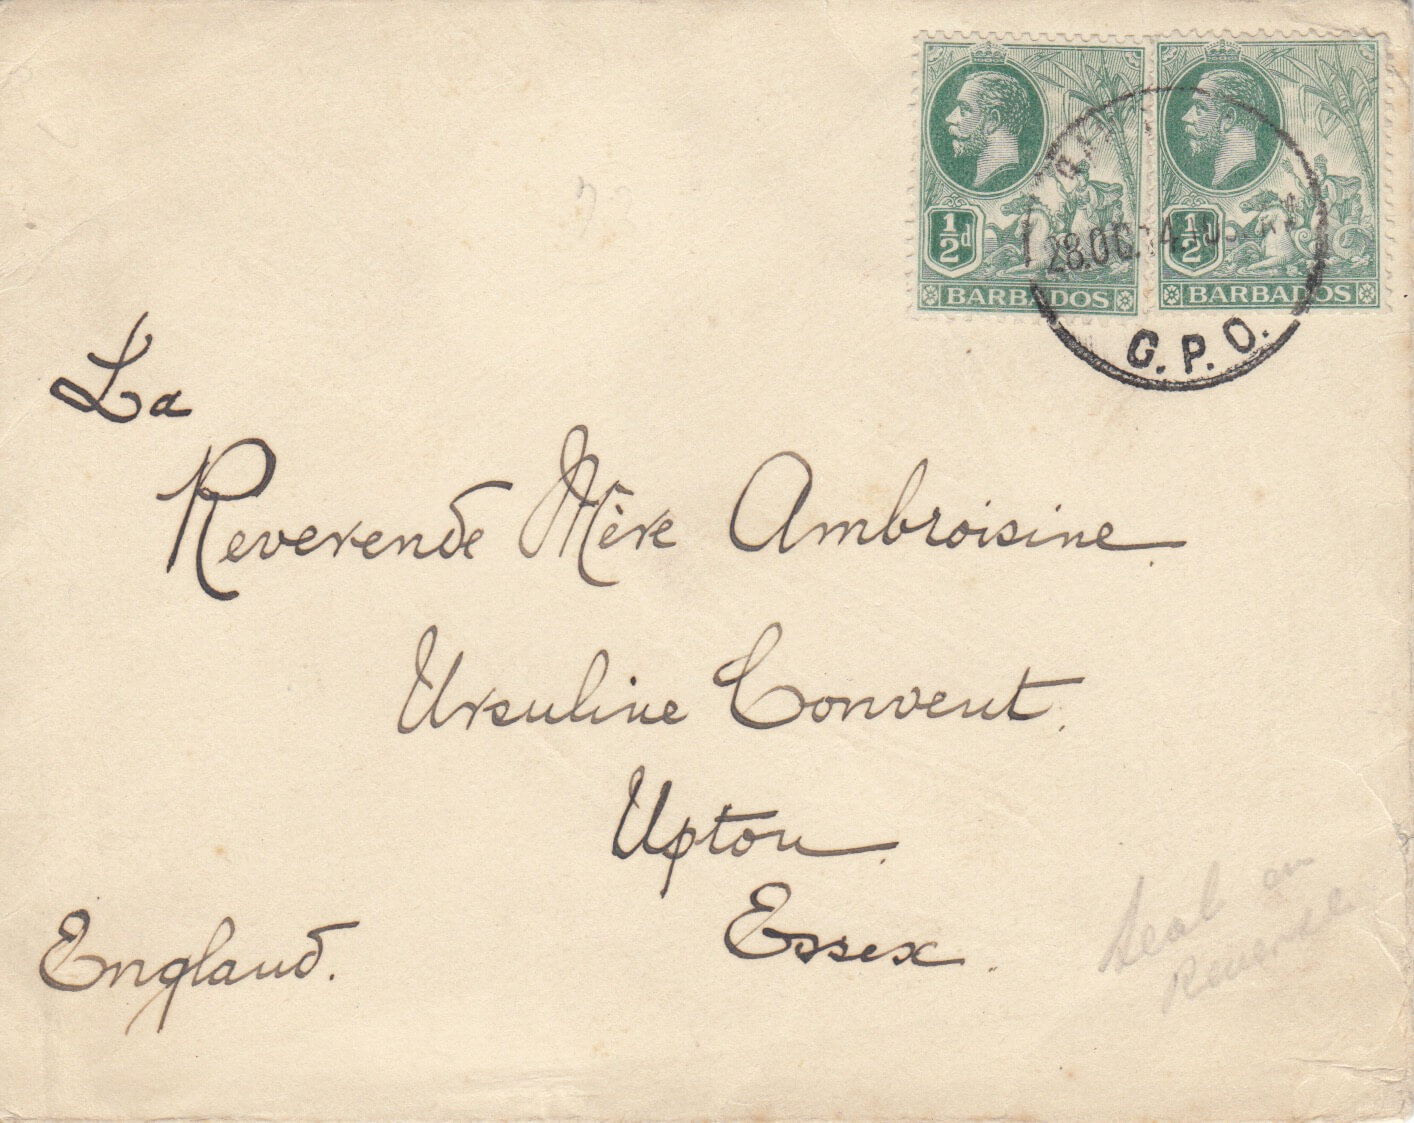 Barbados Belgian Relief Fund Label on cover